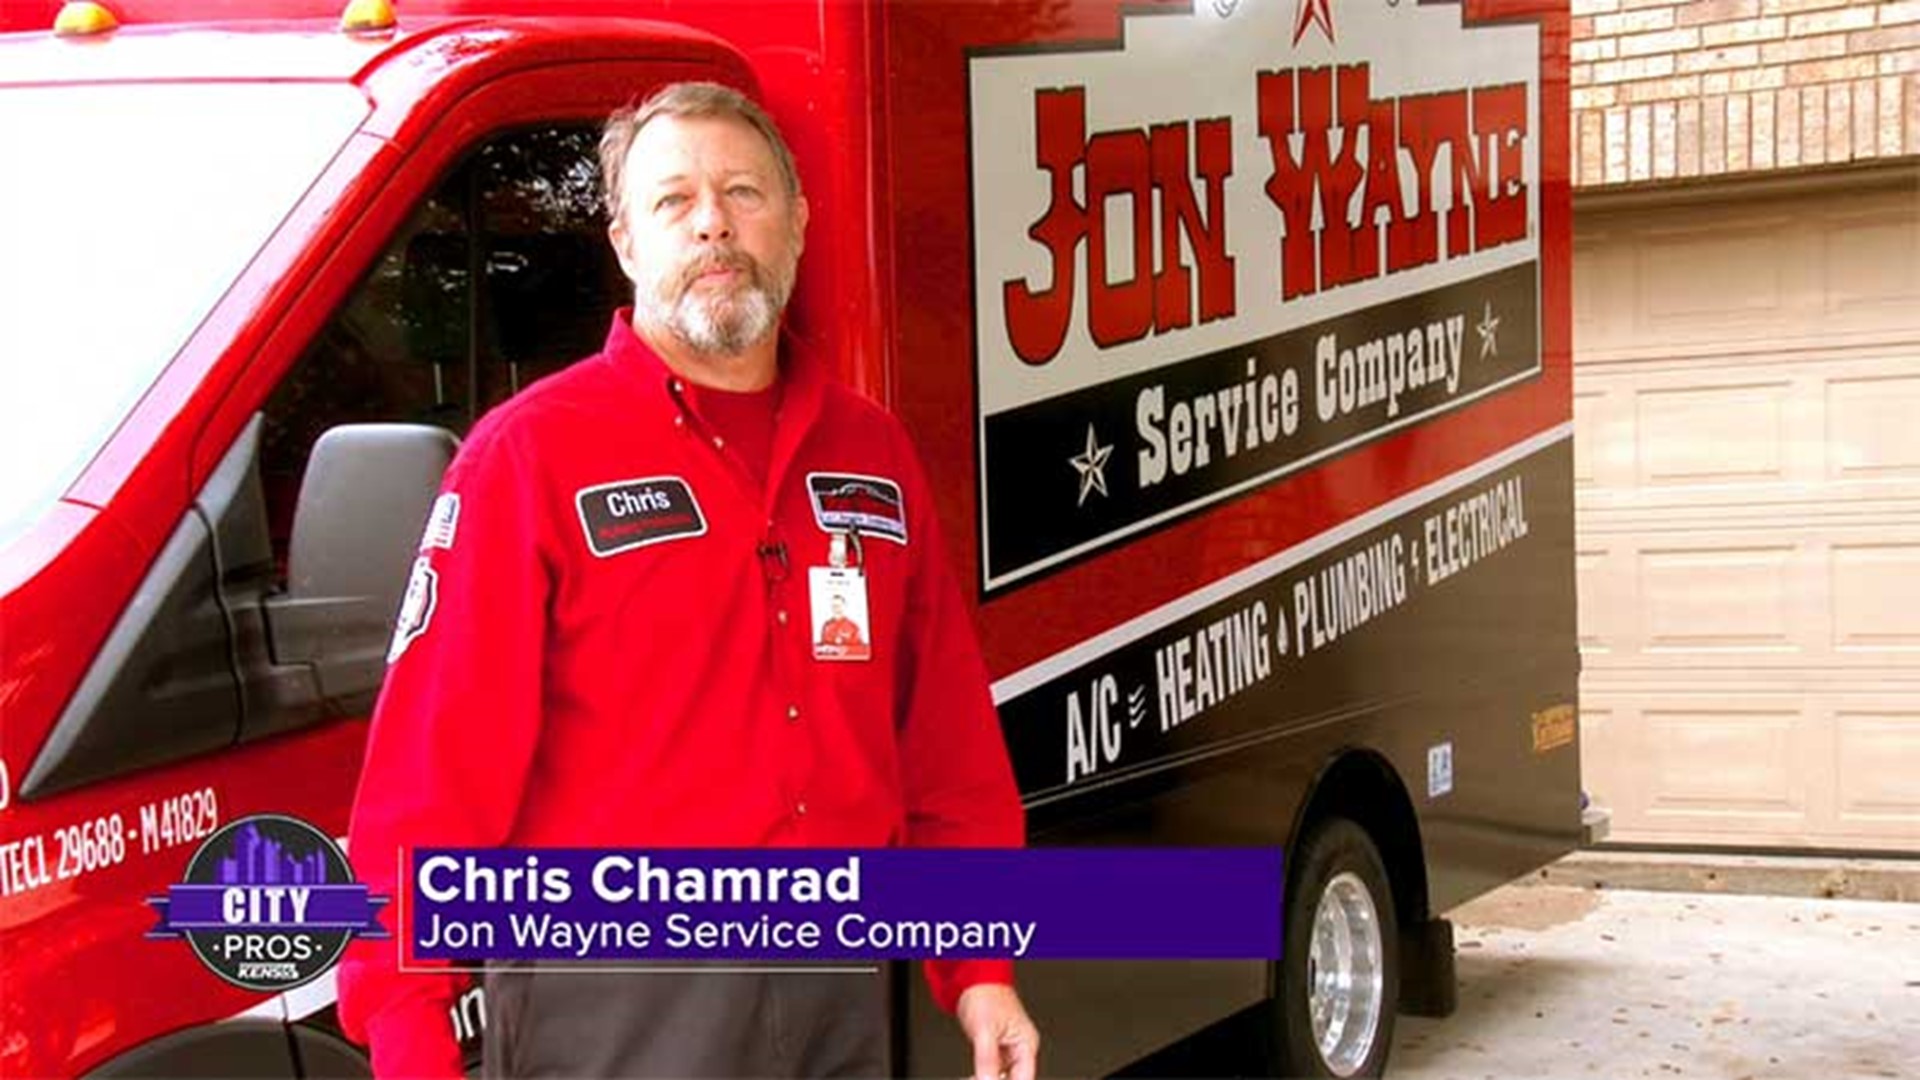 Have a clogged drain that won't clear or a garbage disposal that won't work? Jon Wayne can help with those repairs!